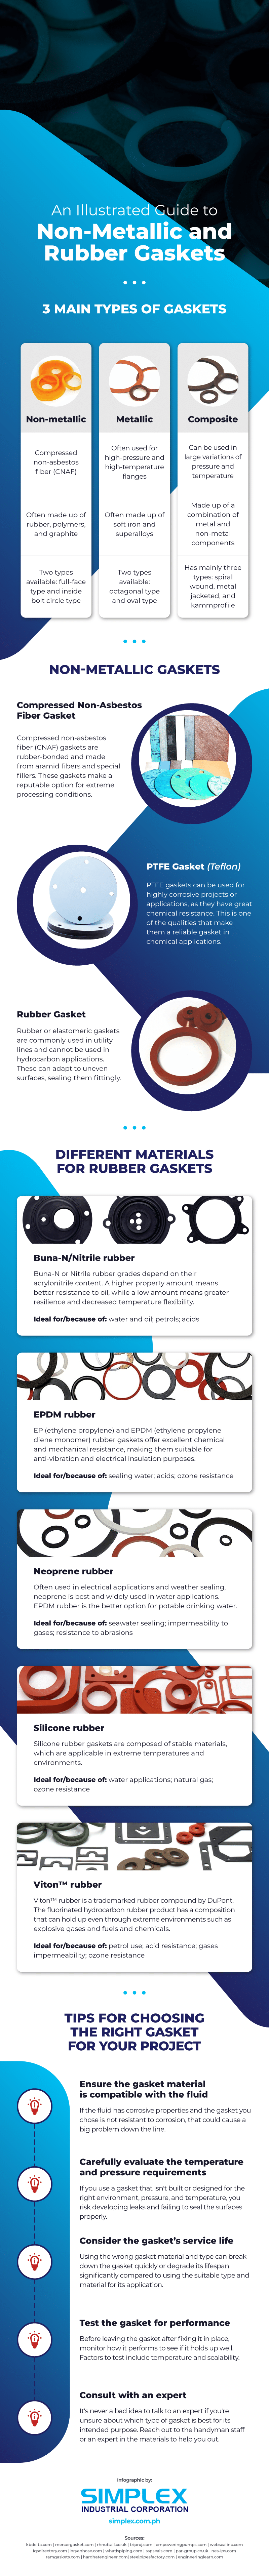 An Illustrated Guide to Non-Metallic and Rubber Gaskets